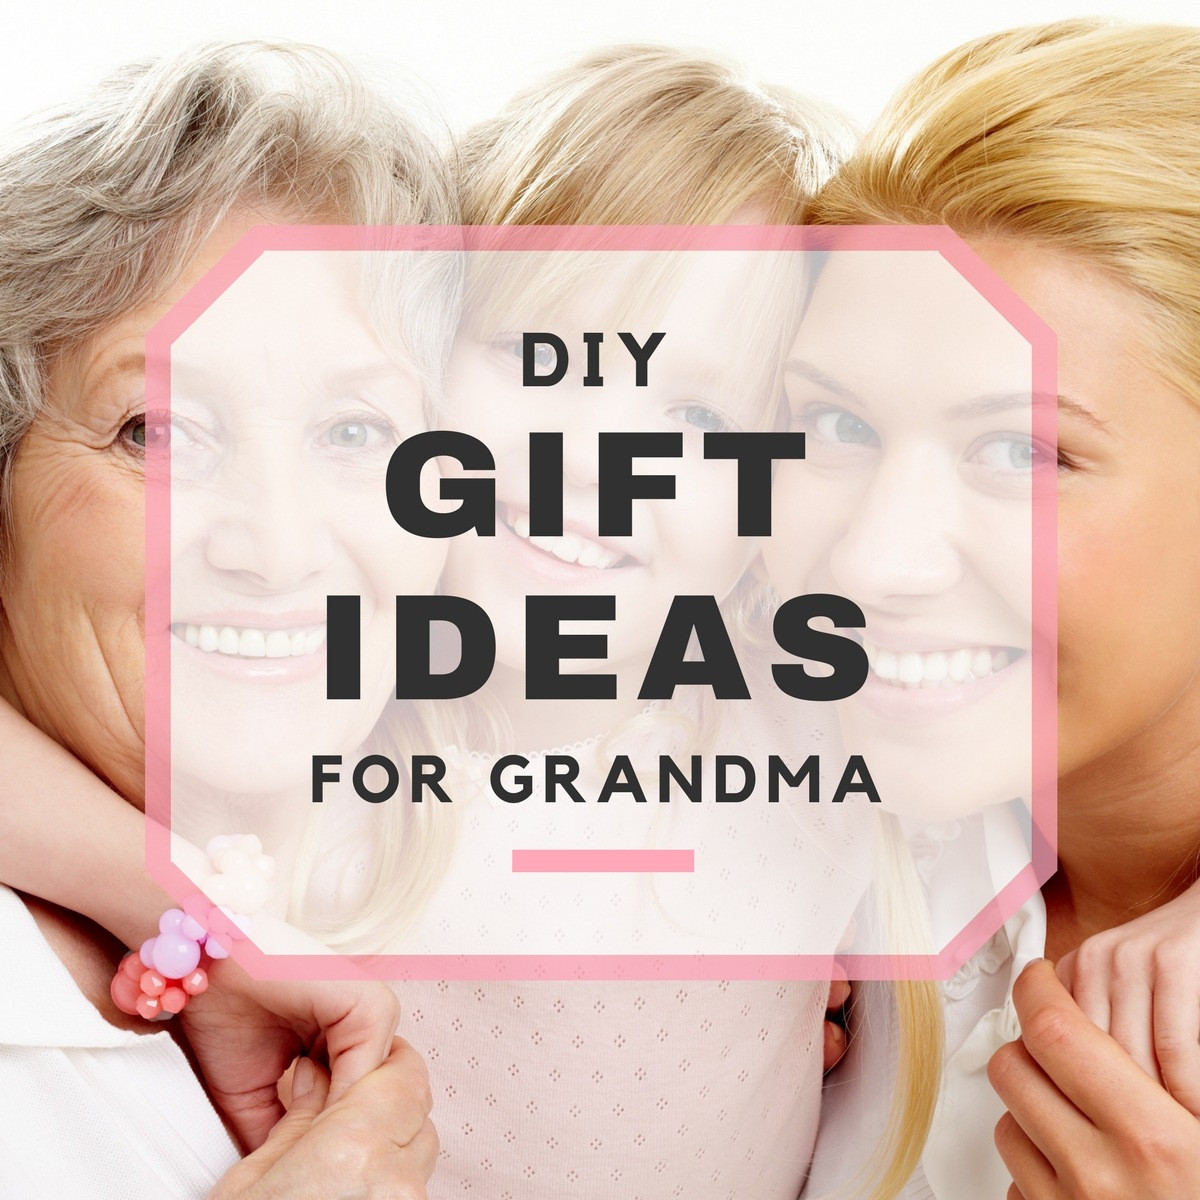 Gift Ideas Grandmother
 Gathered Again Family Reunions Events and Holidays